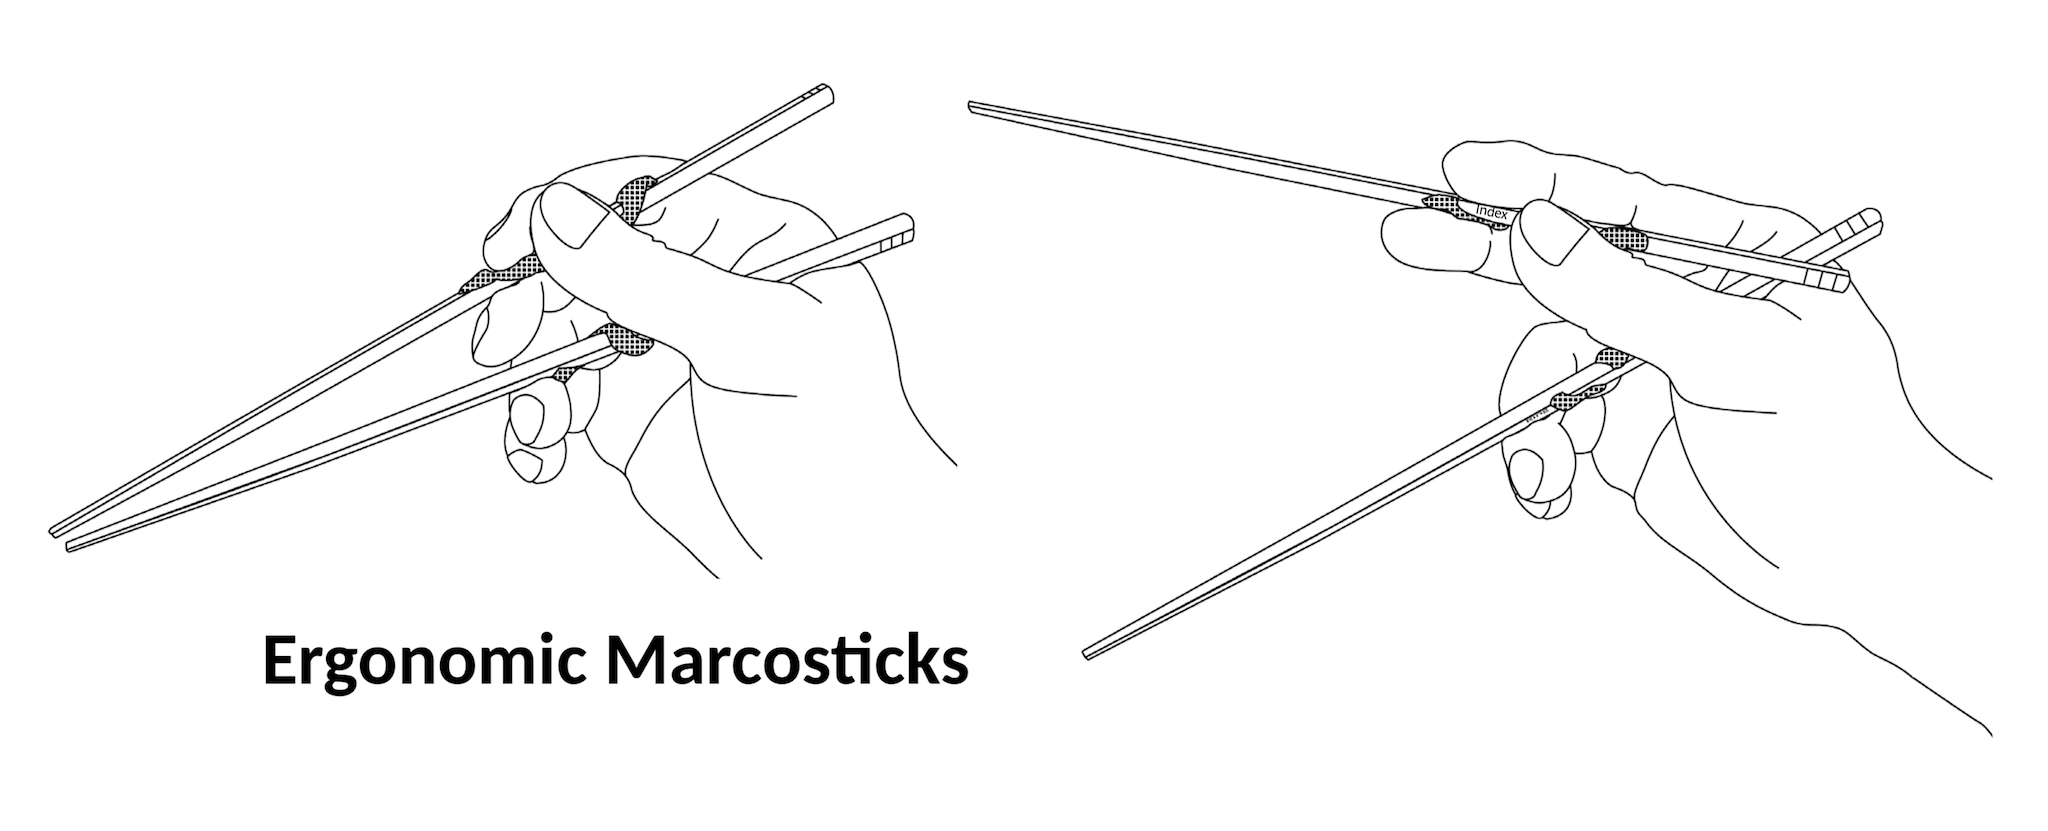 You are currently viewing Model E: Ergonomic Marcosticks